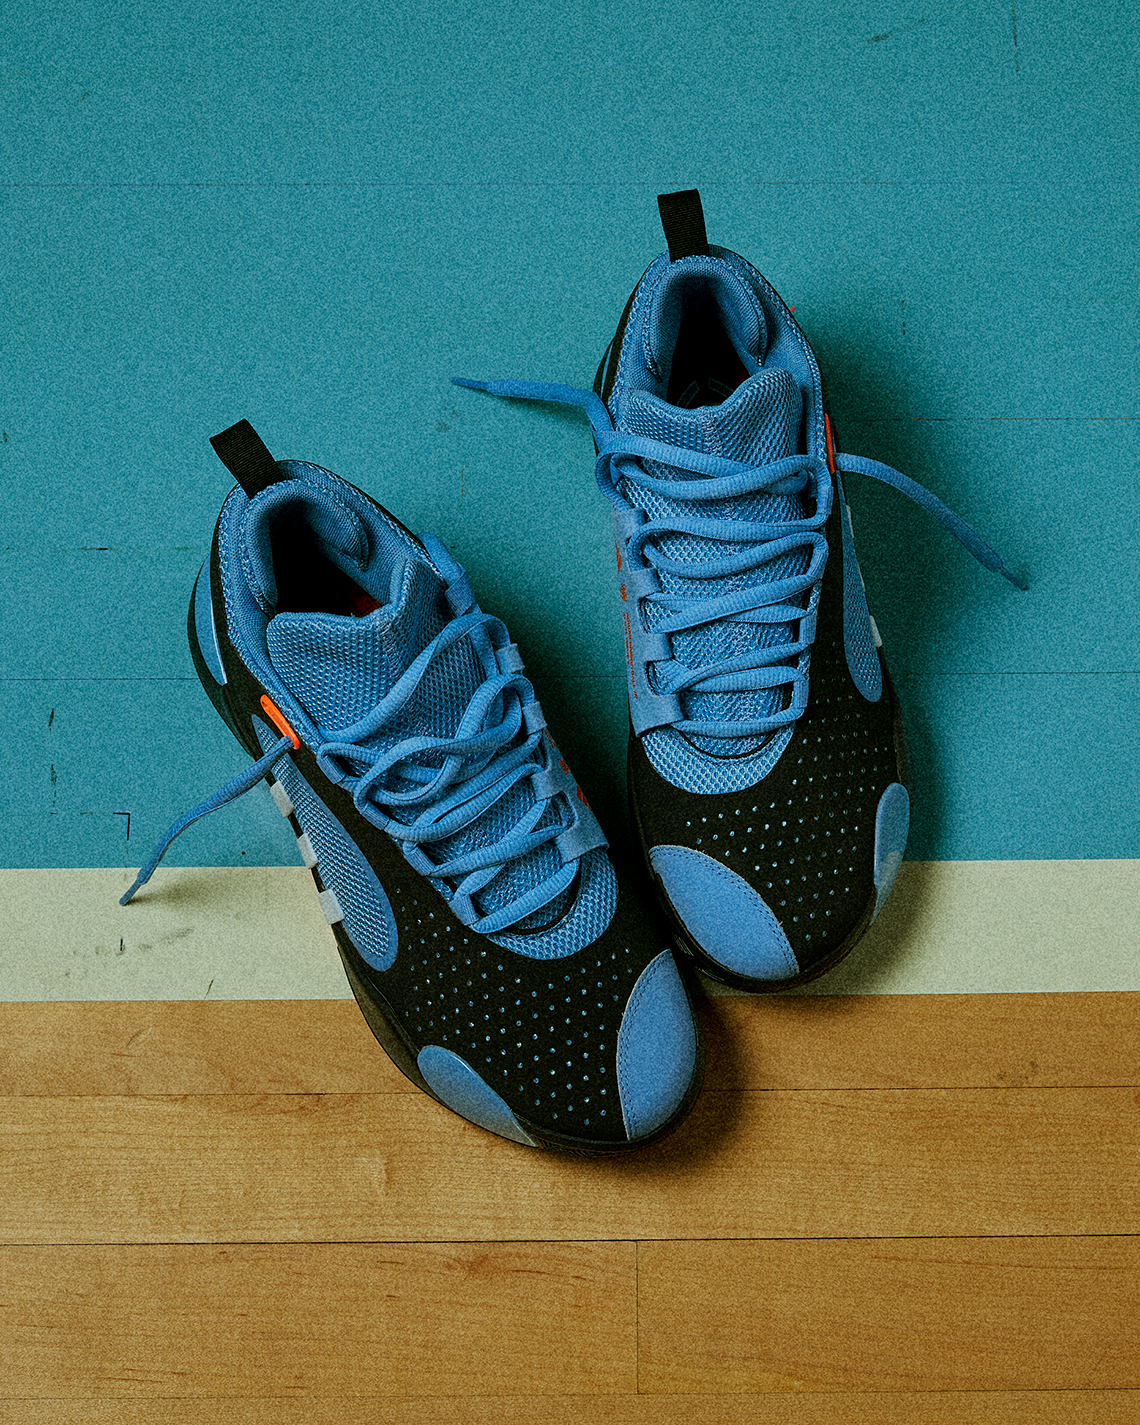 Adidas Don Issue 5 Black Blue Release Date